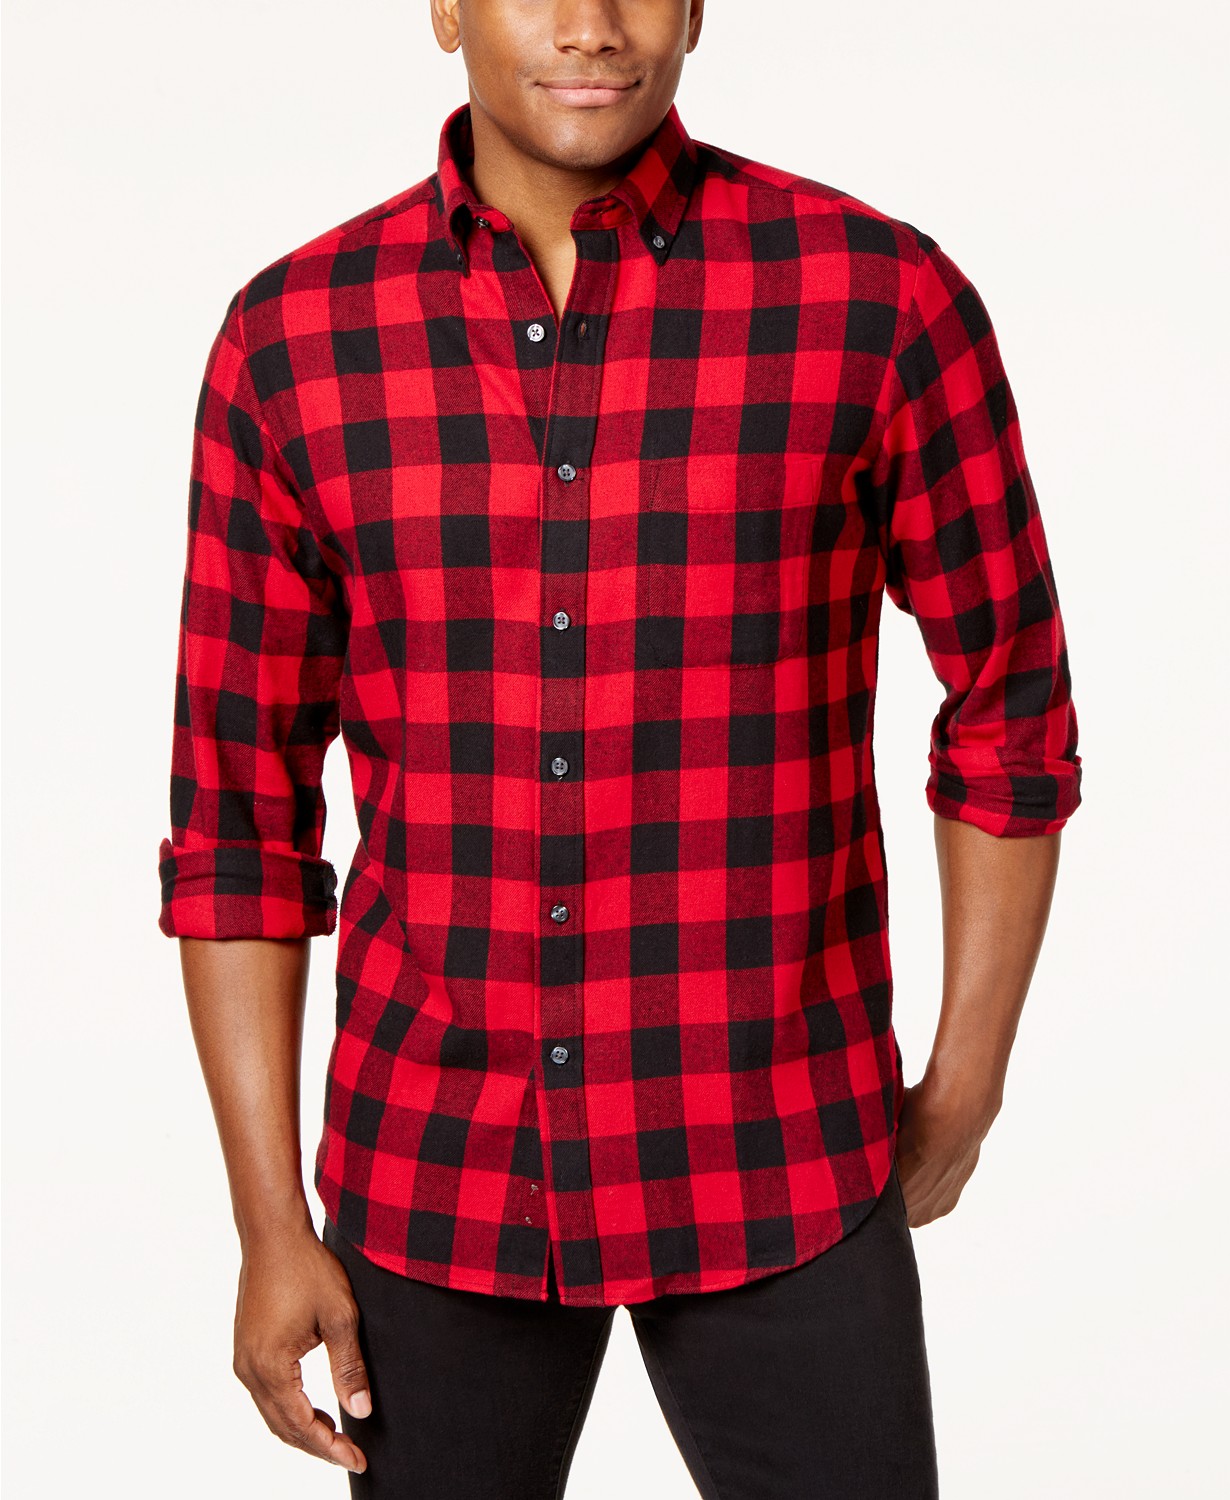 Flannel Shirts for Him & Her | Matching Flannels for Photos | Buffalo Plaid